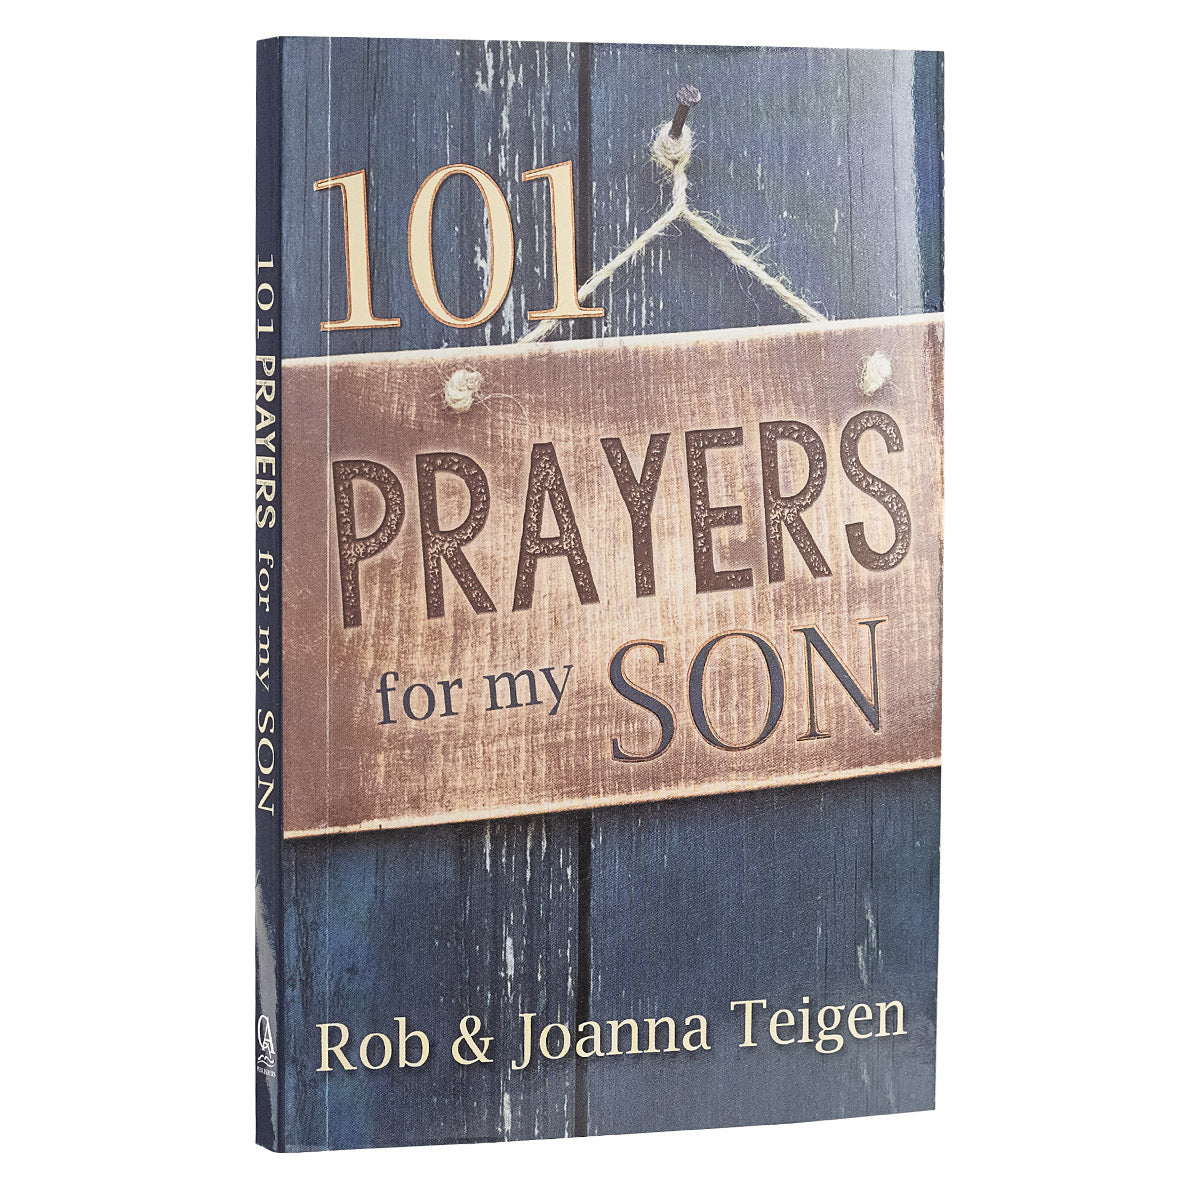 Image of 101 Prayers for My Son Gift Book other